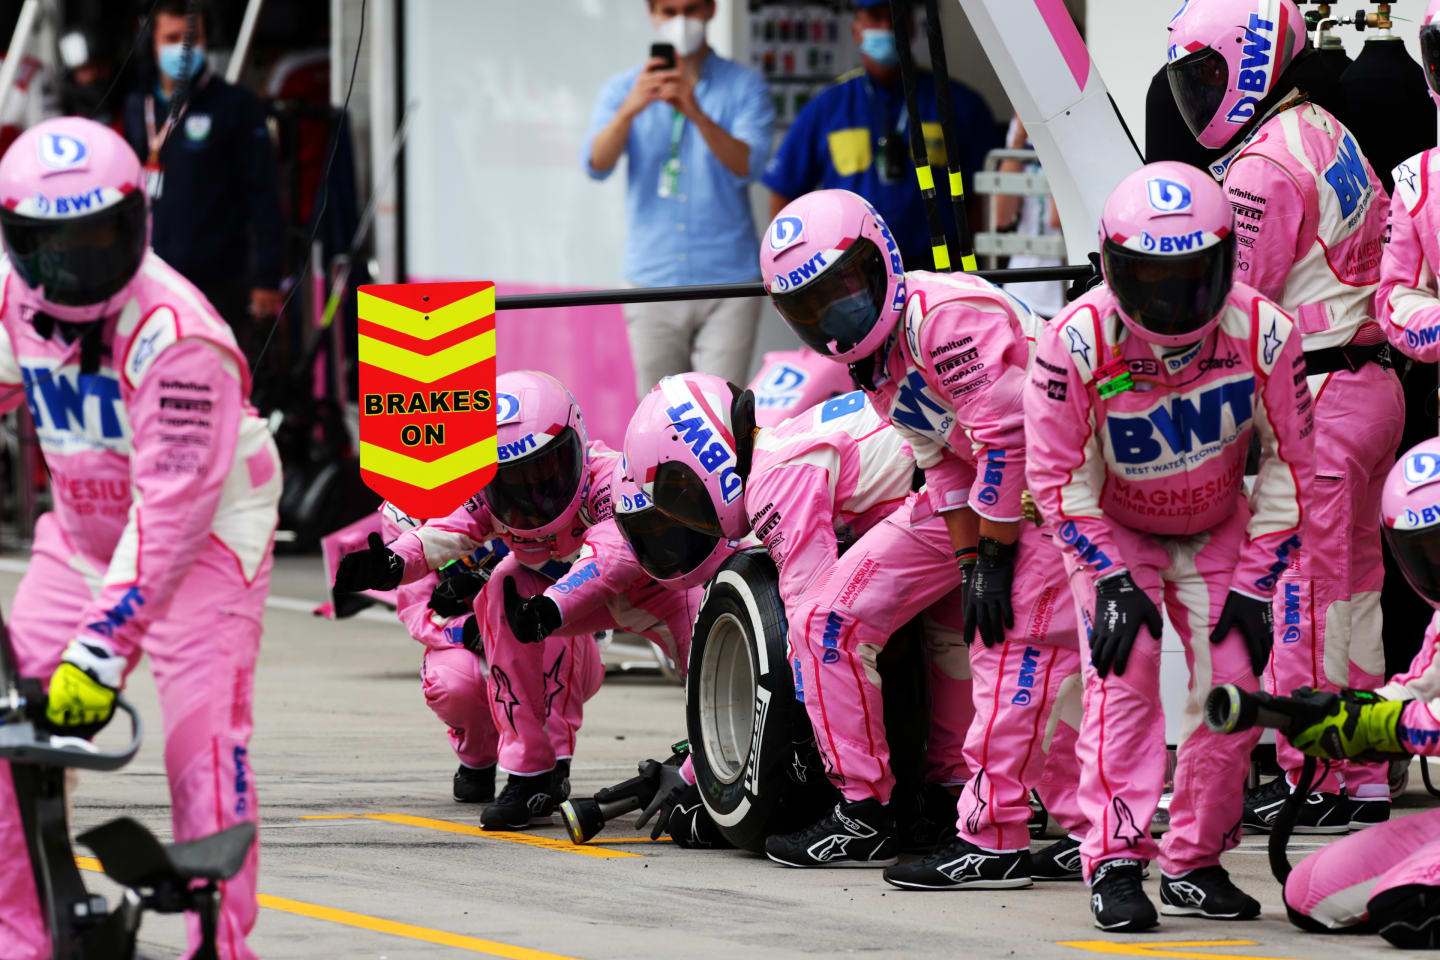 BUDAPEST, HUNGARY - JULY 19: Racing Point team members prepare for a pit stop during the Formula One Grand Prix of Hungary at Hungaroring on July 19, 2020 in Budapest, Hungary. (Photo by Peter Fox/Getty Images)